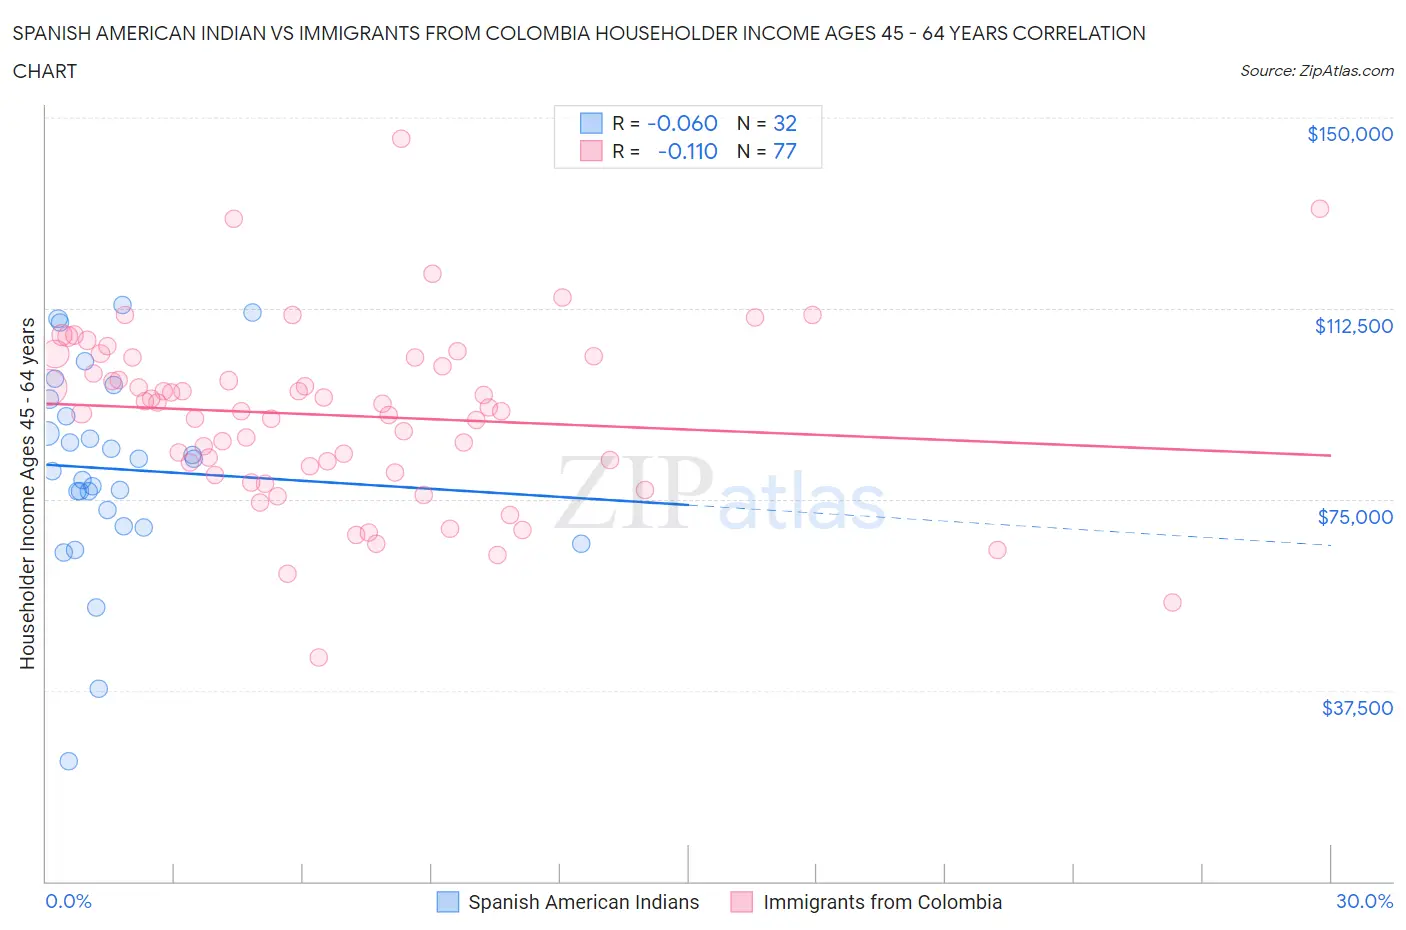 Spanish American Indian vs Immigrants from Colombia Householder Income Ages 45 - 64 years